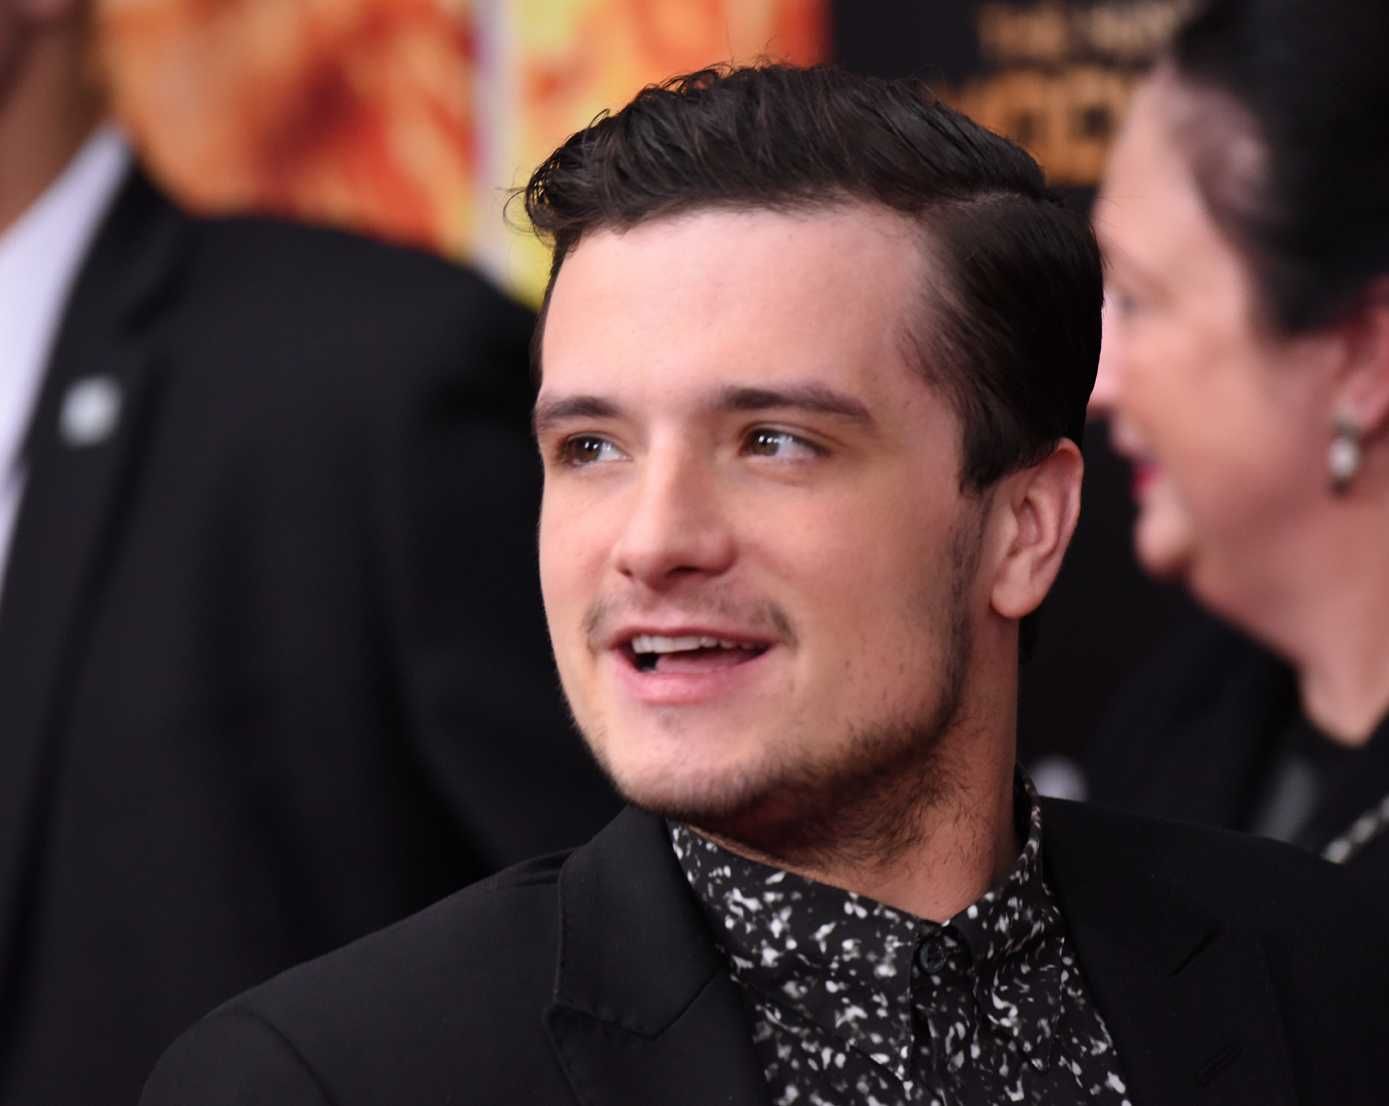 "Found my spot in the sun" - Josh Hutcherson bags prized L.A. property for over the asking price!